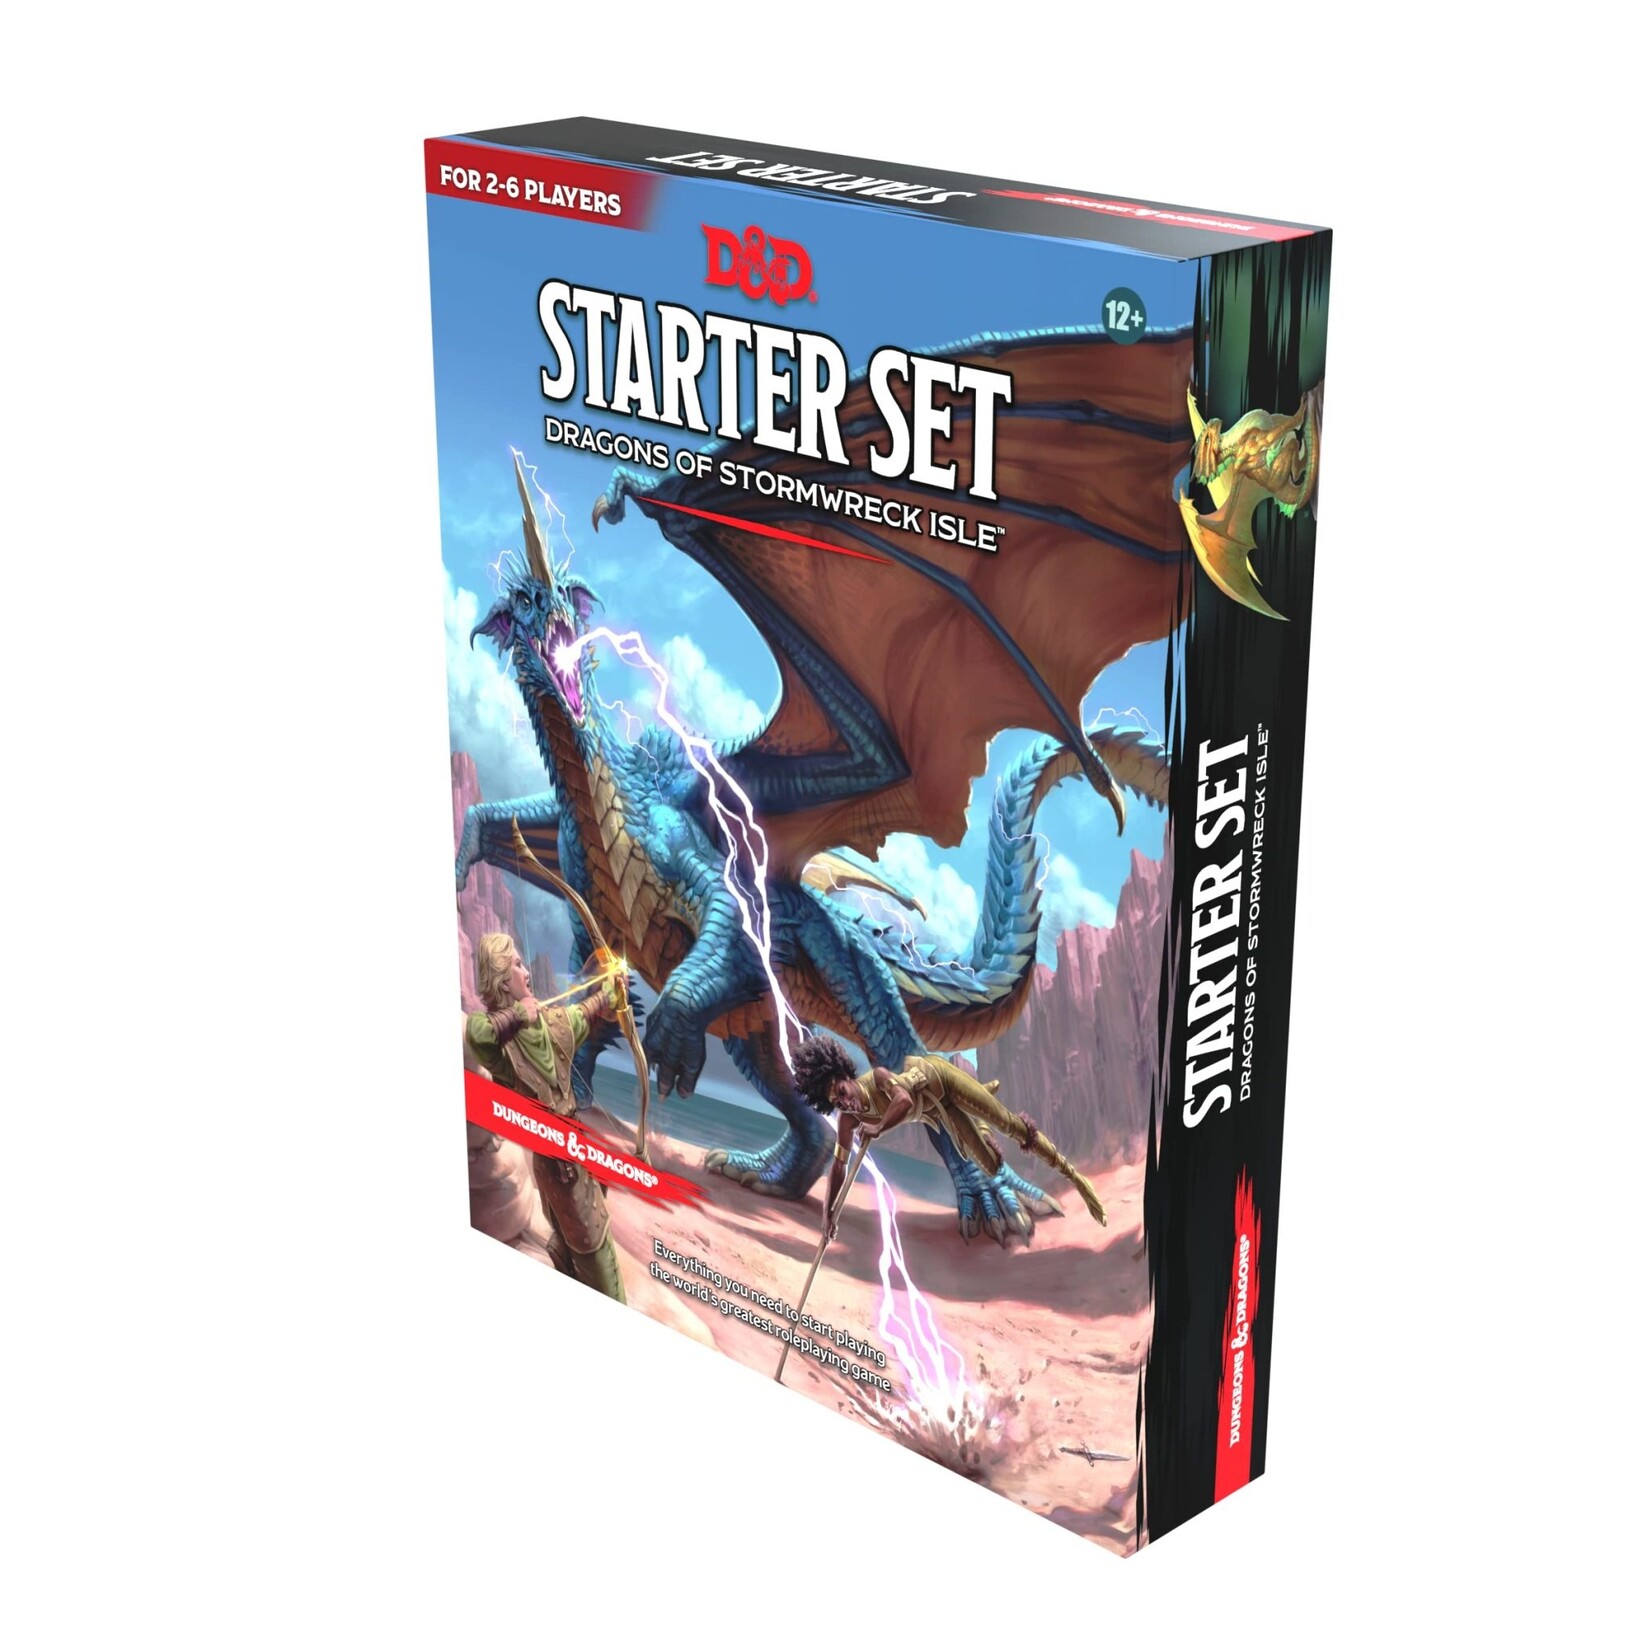 Wizards of the Coast D&D 5e Starter Kit - Dragons of Stormwreck Isle